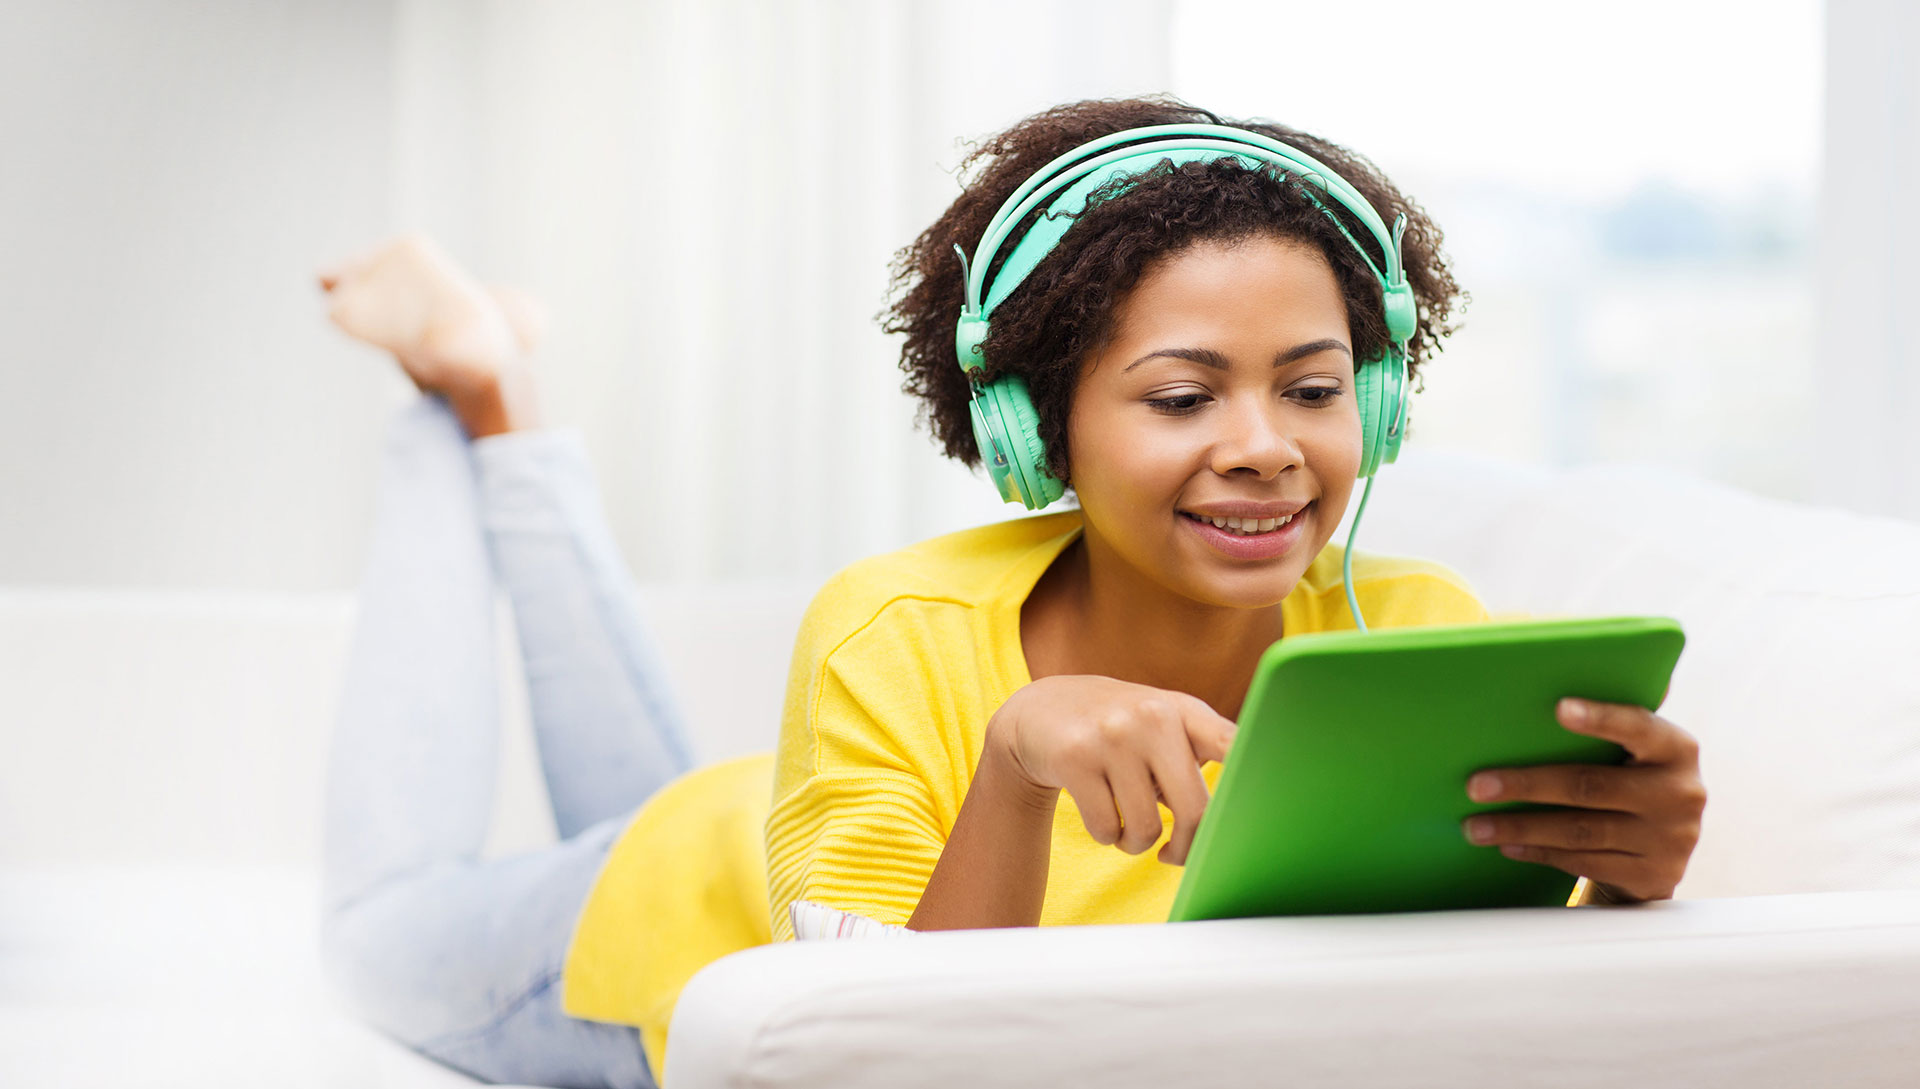 young girl smiling and listening to audiobooks